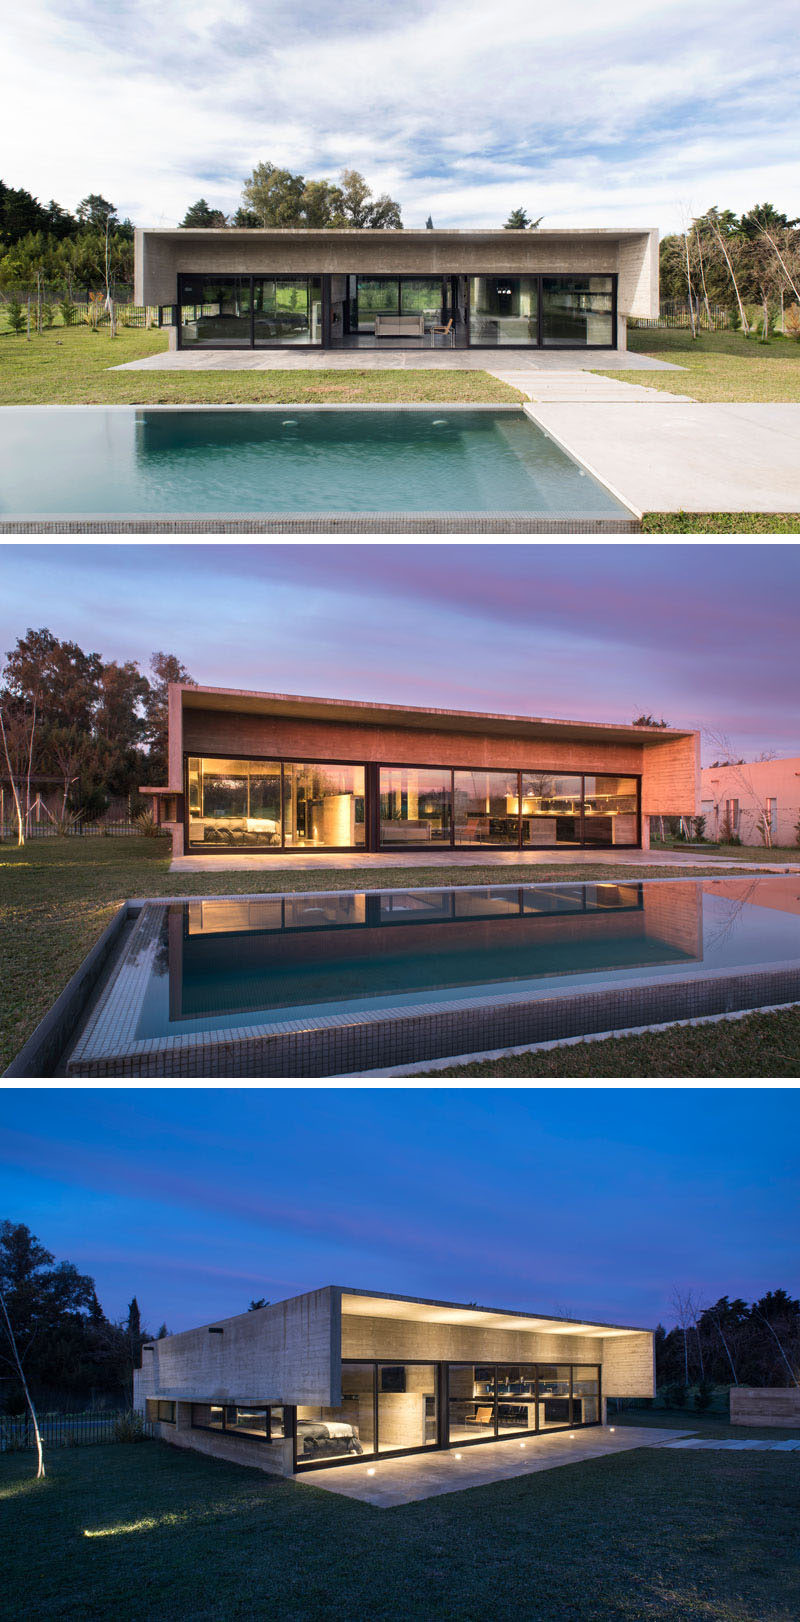 At the rear of this modern concrete house, the roof line extends out over a patio and provides some sun protection, while a path leads up to the swimming pool. A night, lighting shows off the design of the home and highlights the overhang. #ConcreteHouse #SwimmingPool #ModernHouse